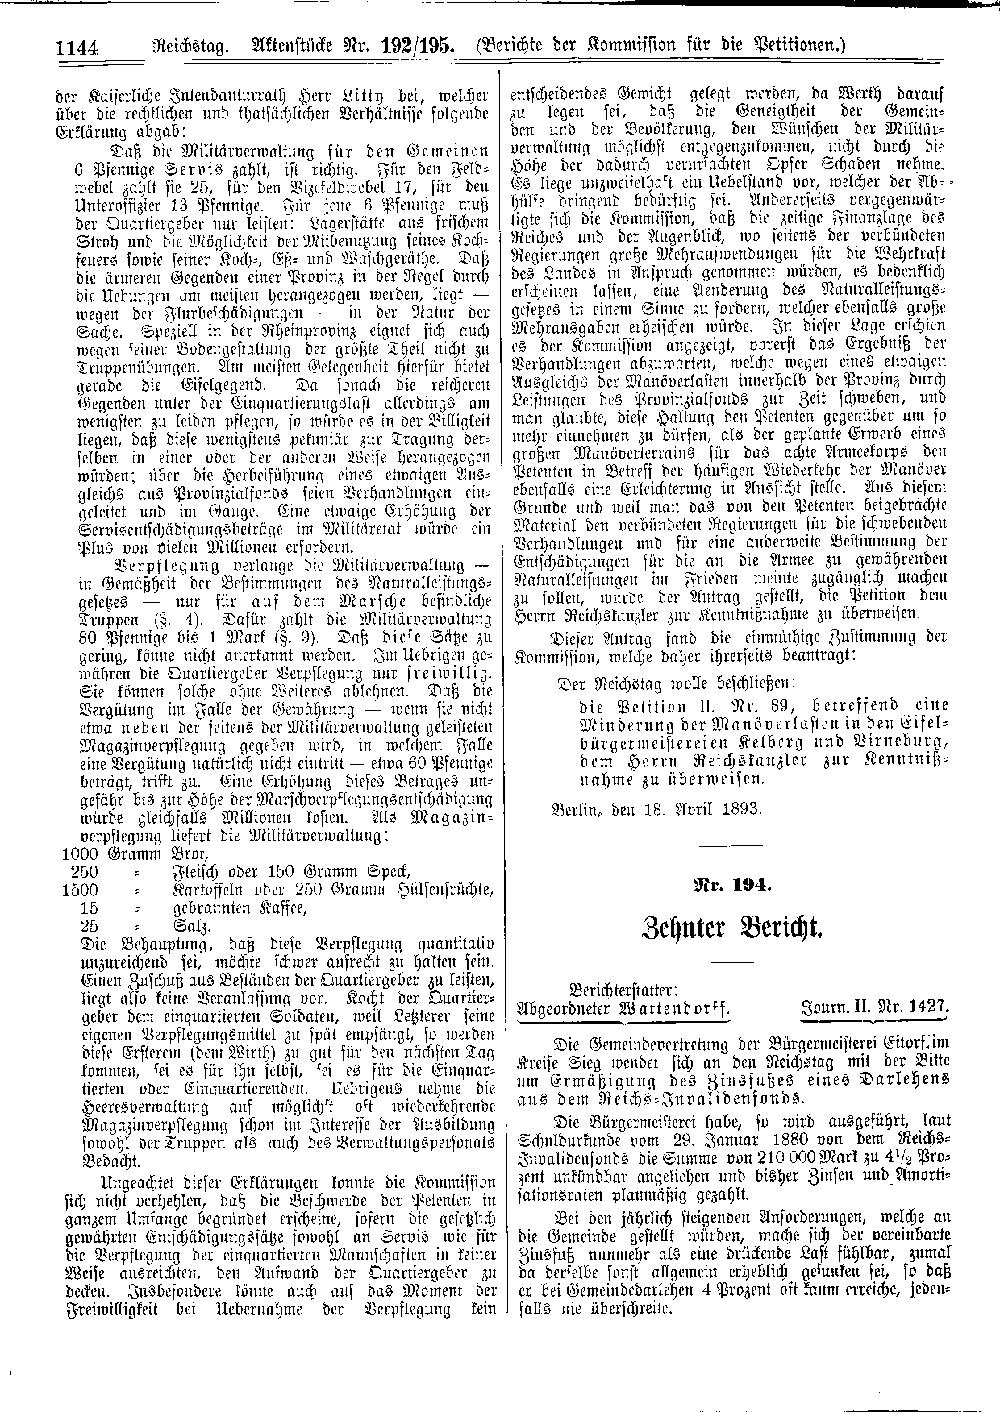 Scan of page 1144